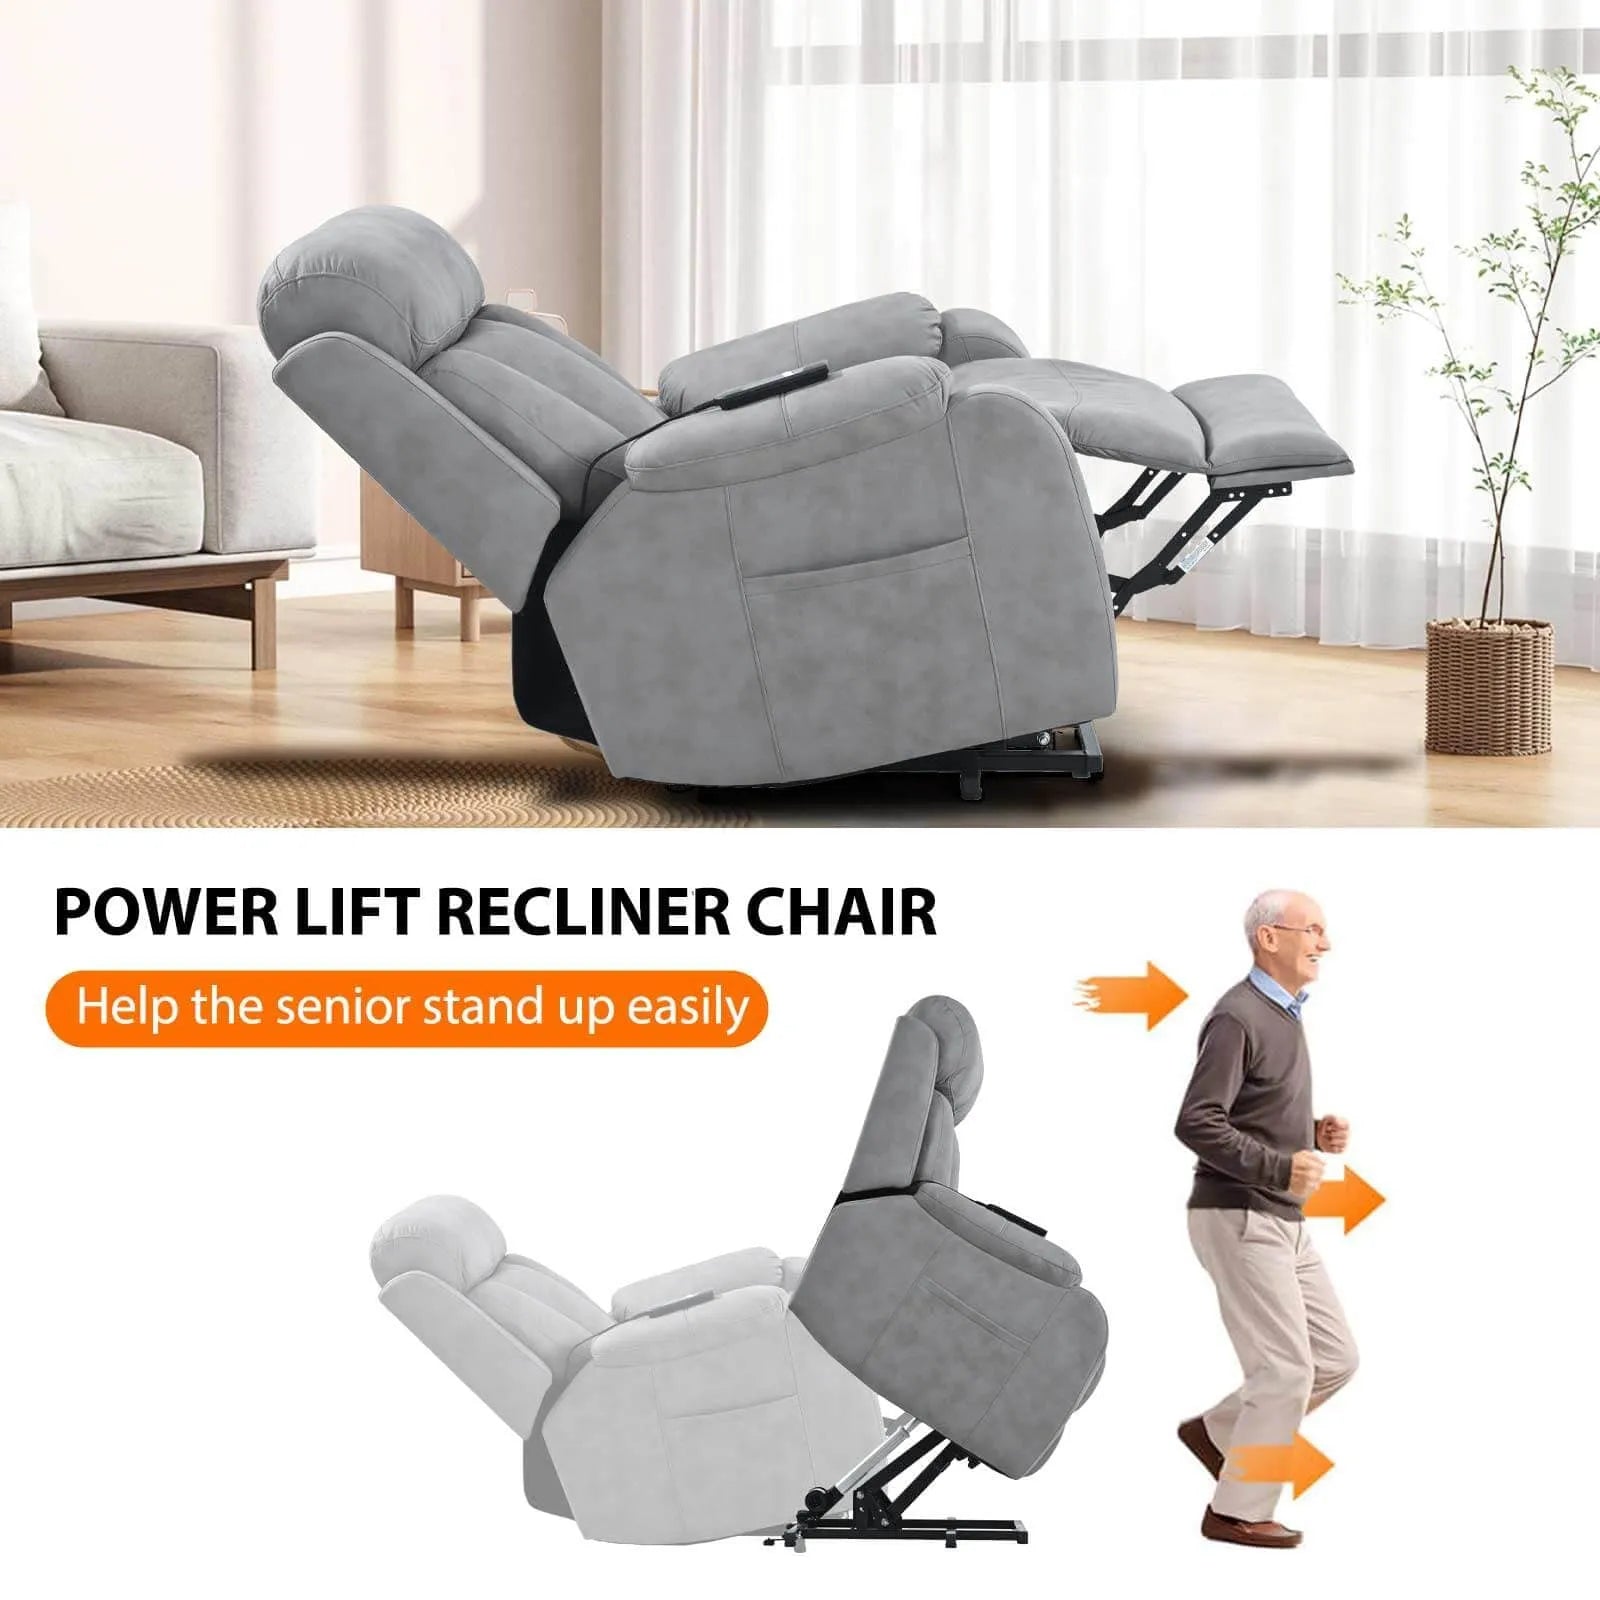 lift recliners that helps you stand up